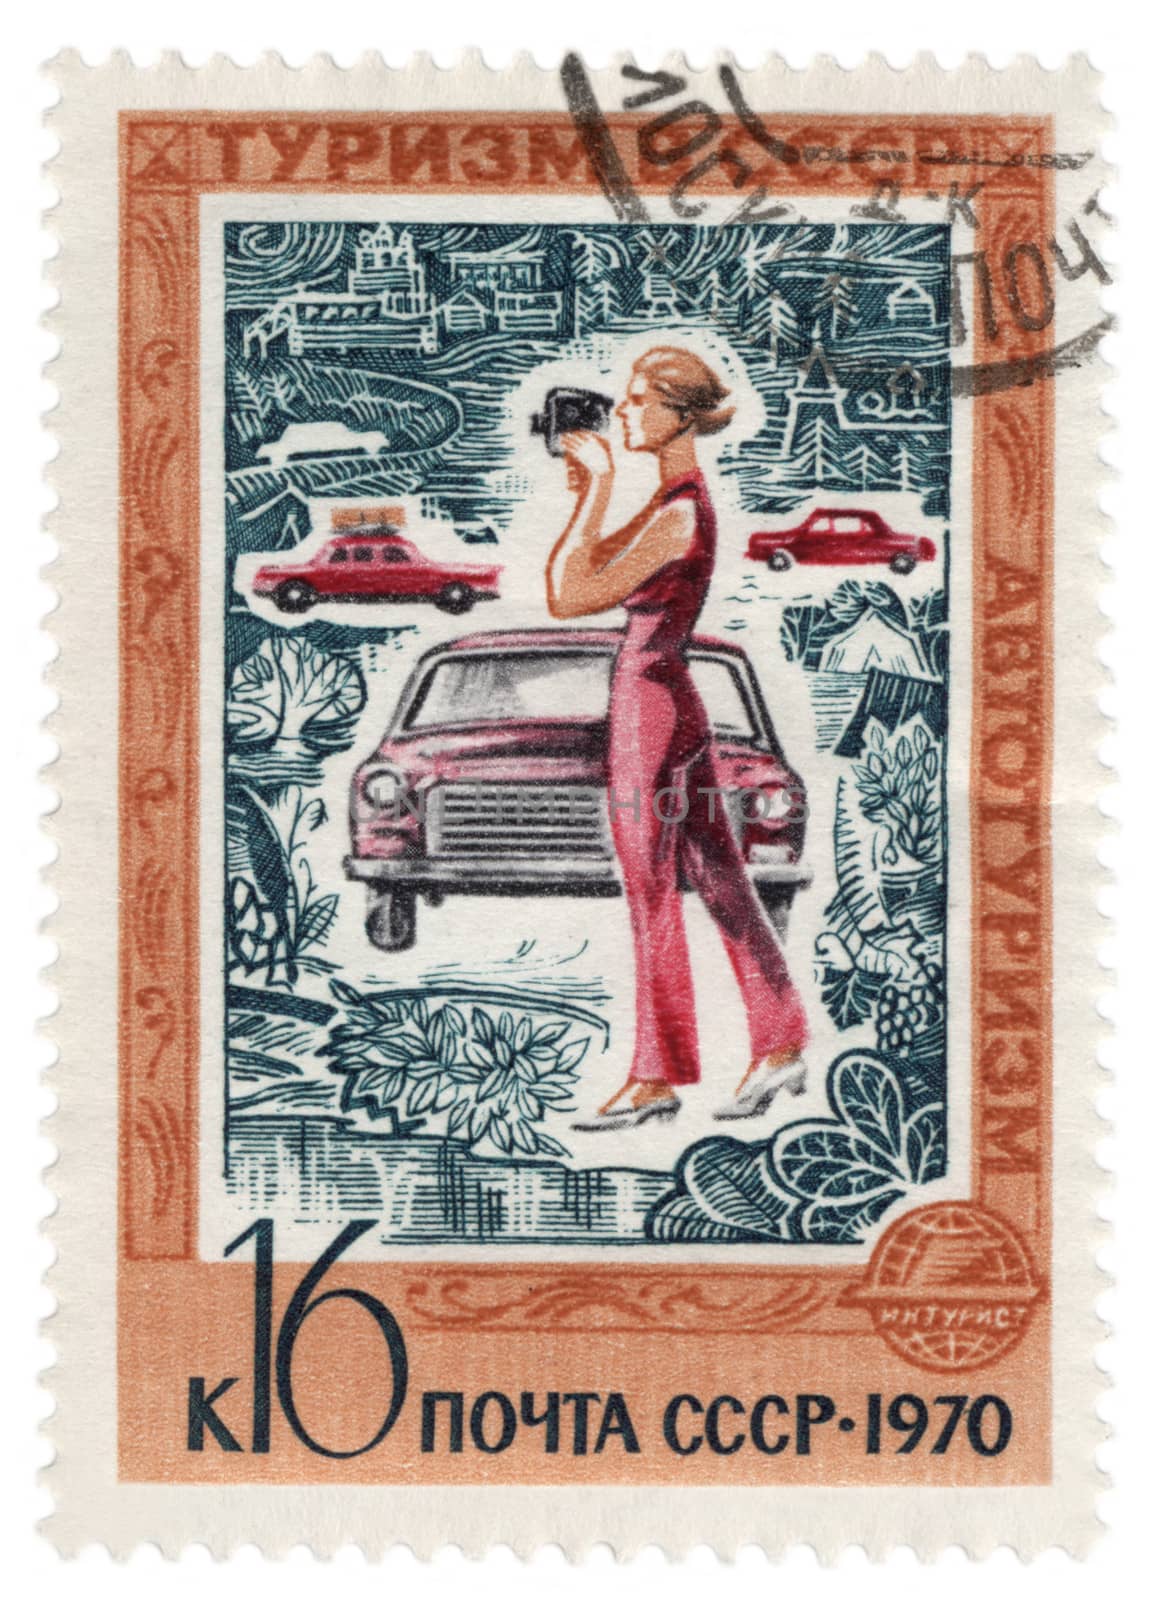 Woman with camera and car on post stamp by wander